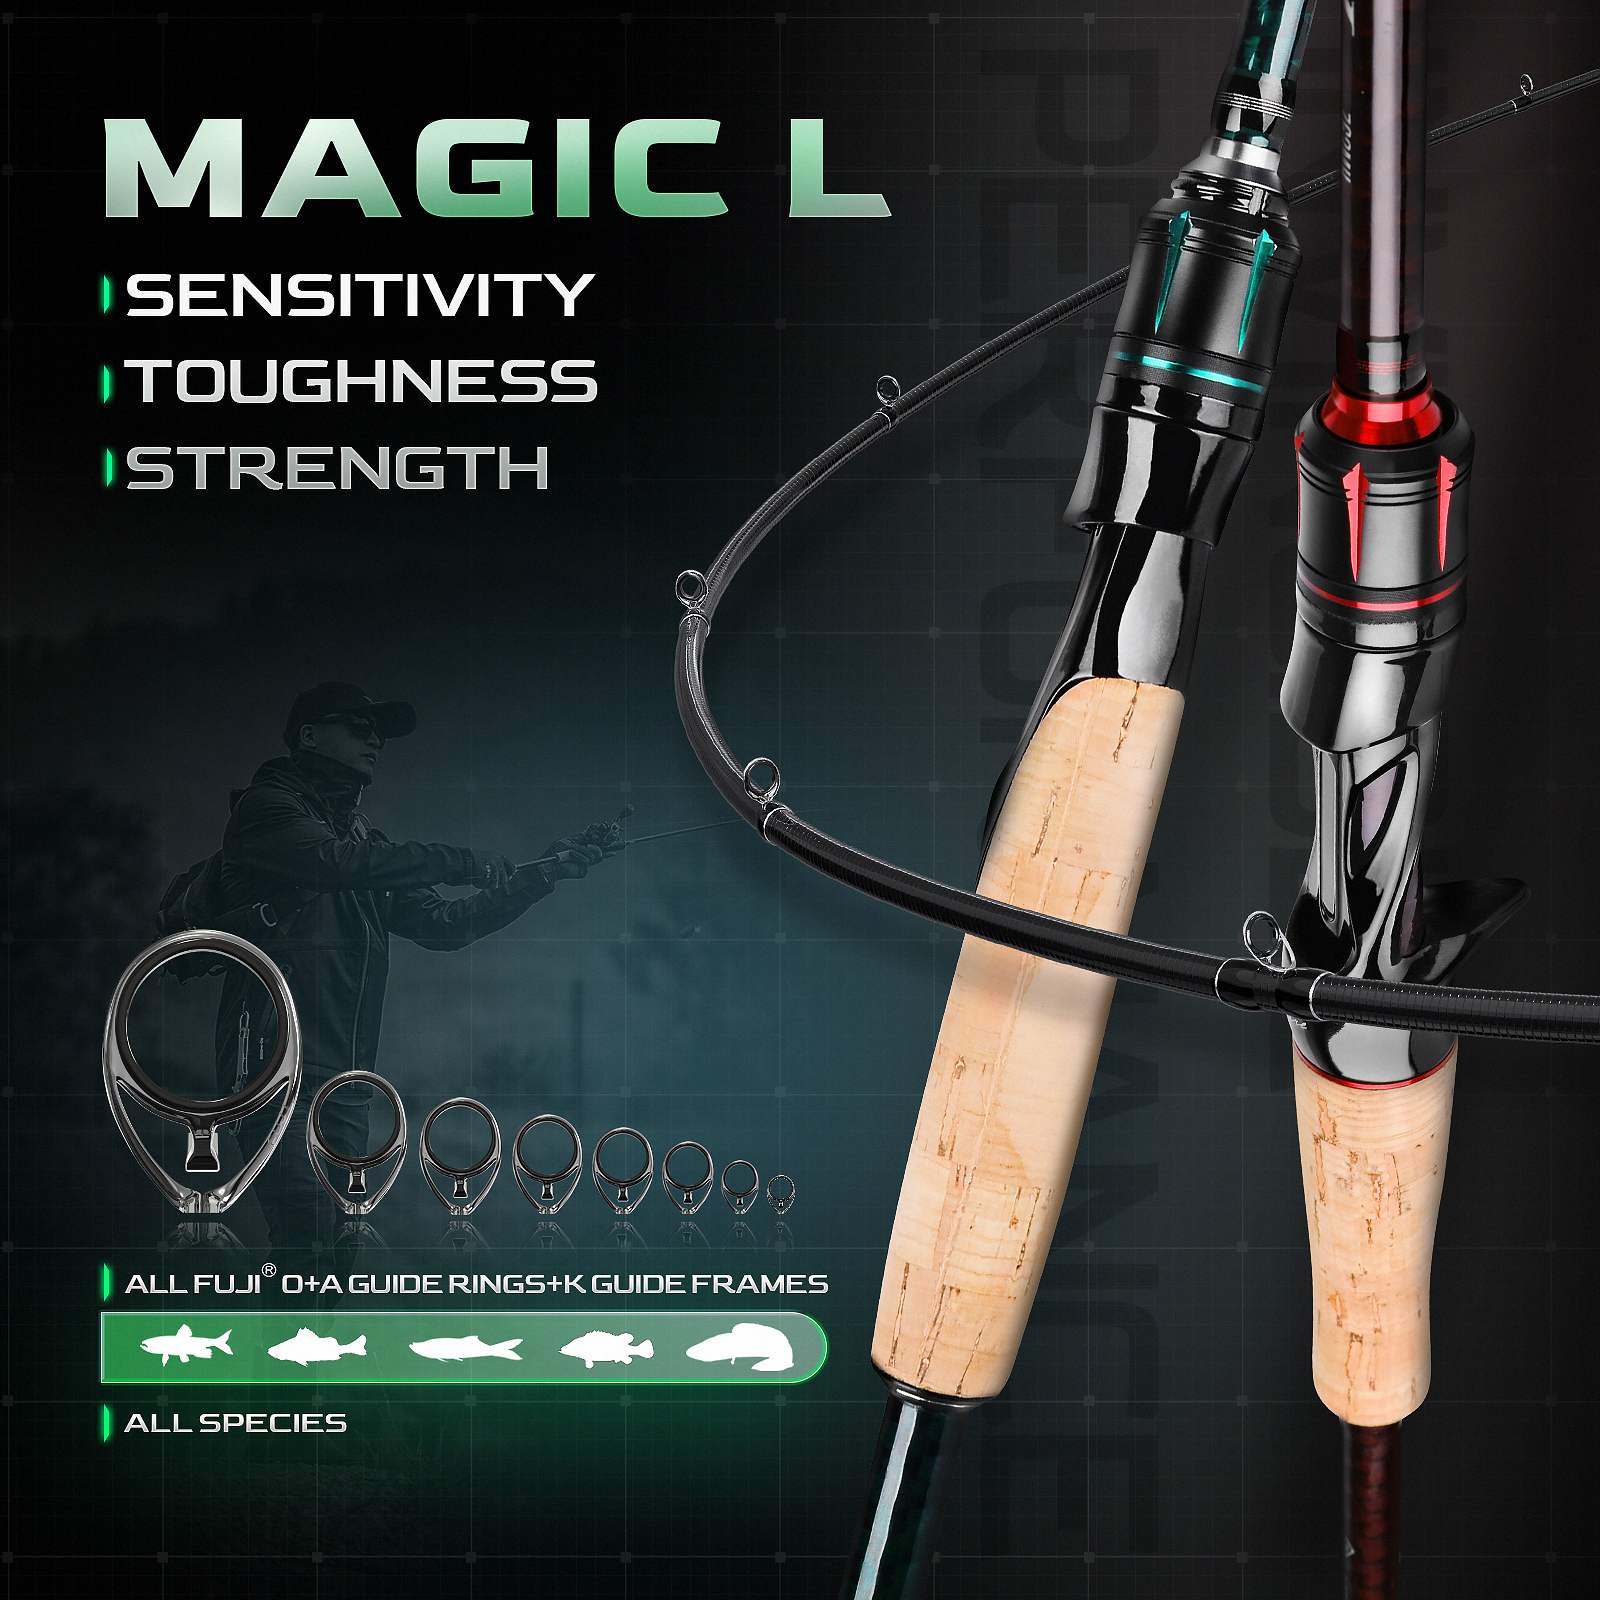 Clearance Sale] HANDING Magic L Fishing Rod, 2-Piece BFS Spinning and  Casting Rod, Fuji O+A Ring Guides, 30 Ton+24 Ton Carbon Fiber, for Bass,  Trout, Walleye, Catfish Etc.